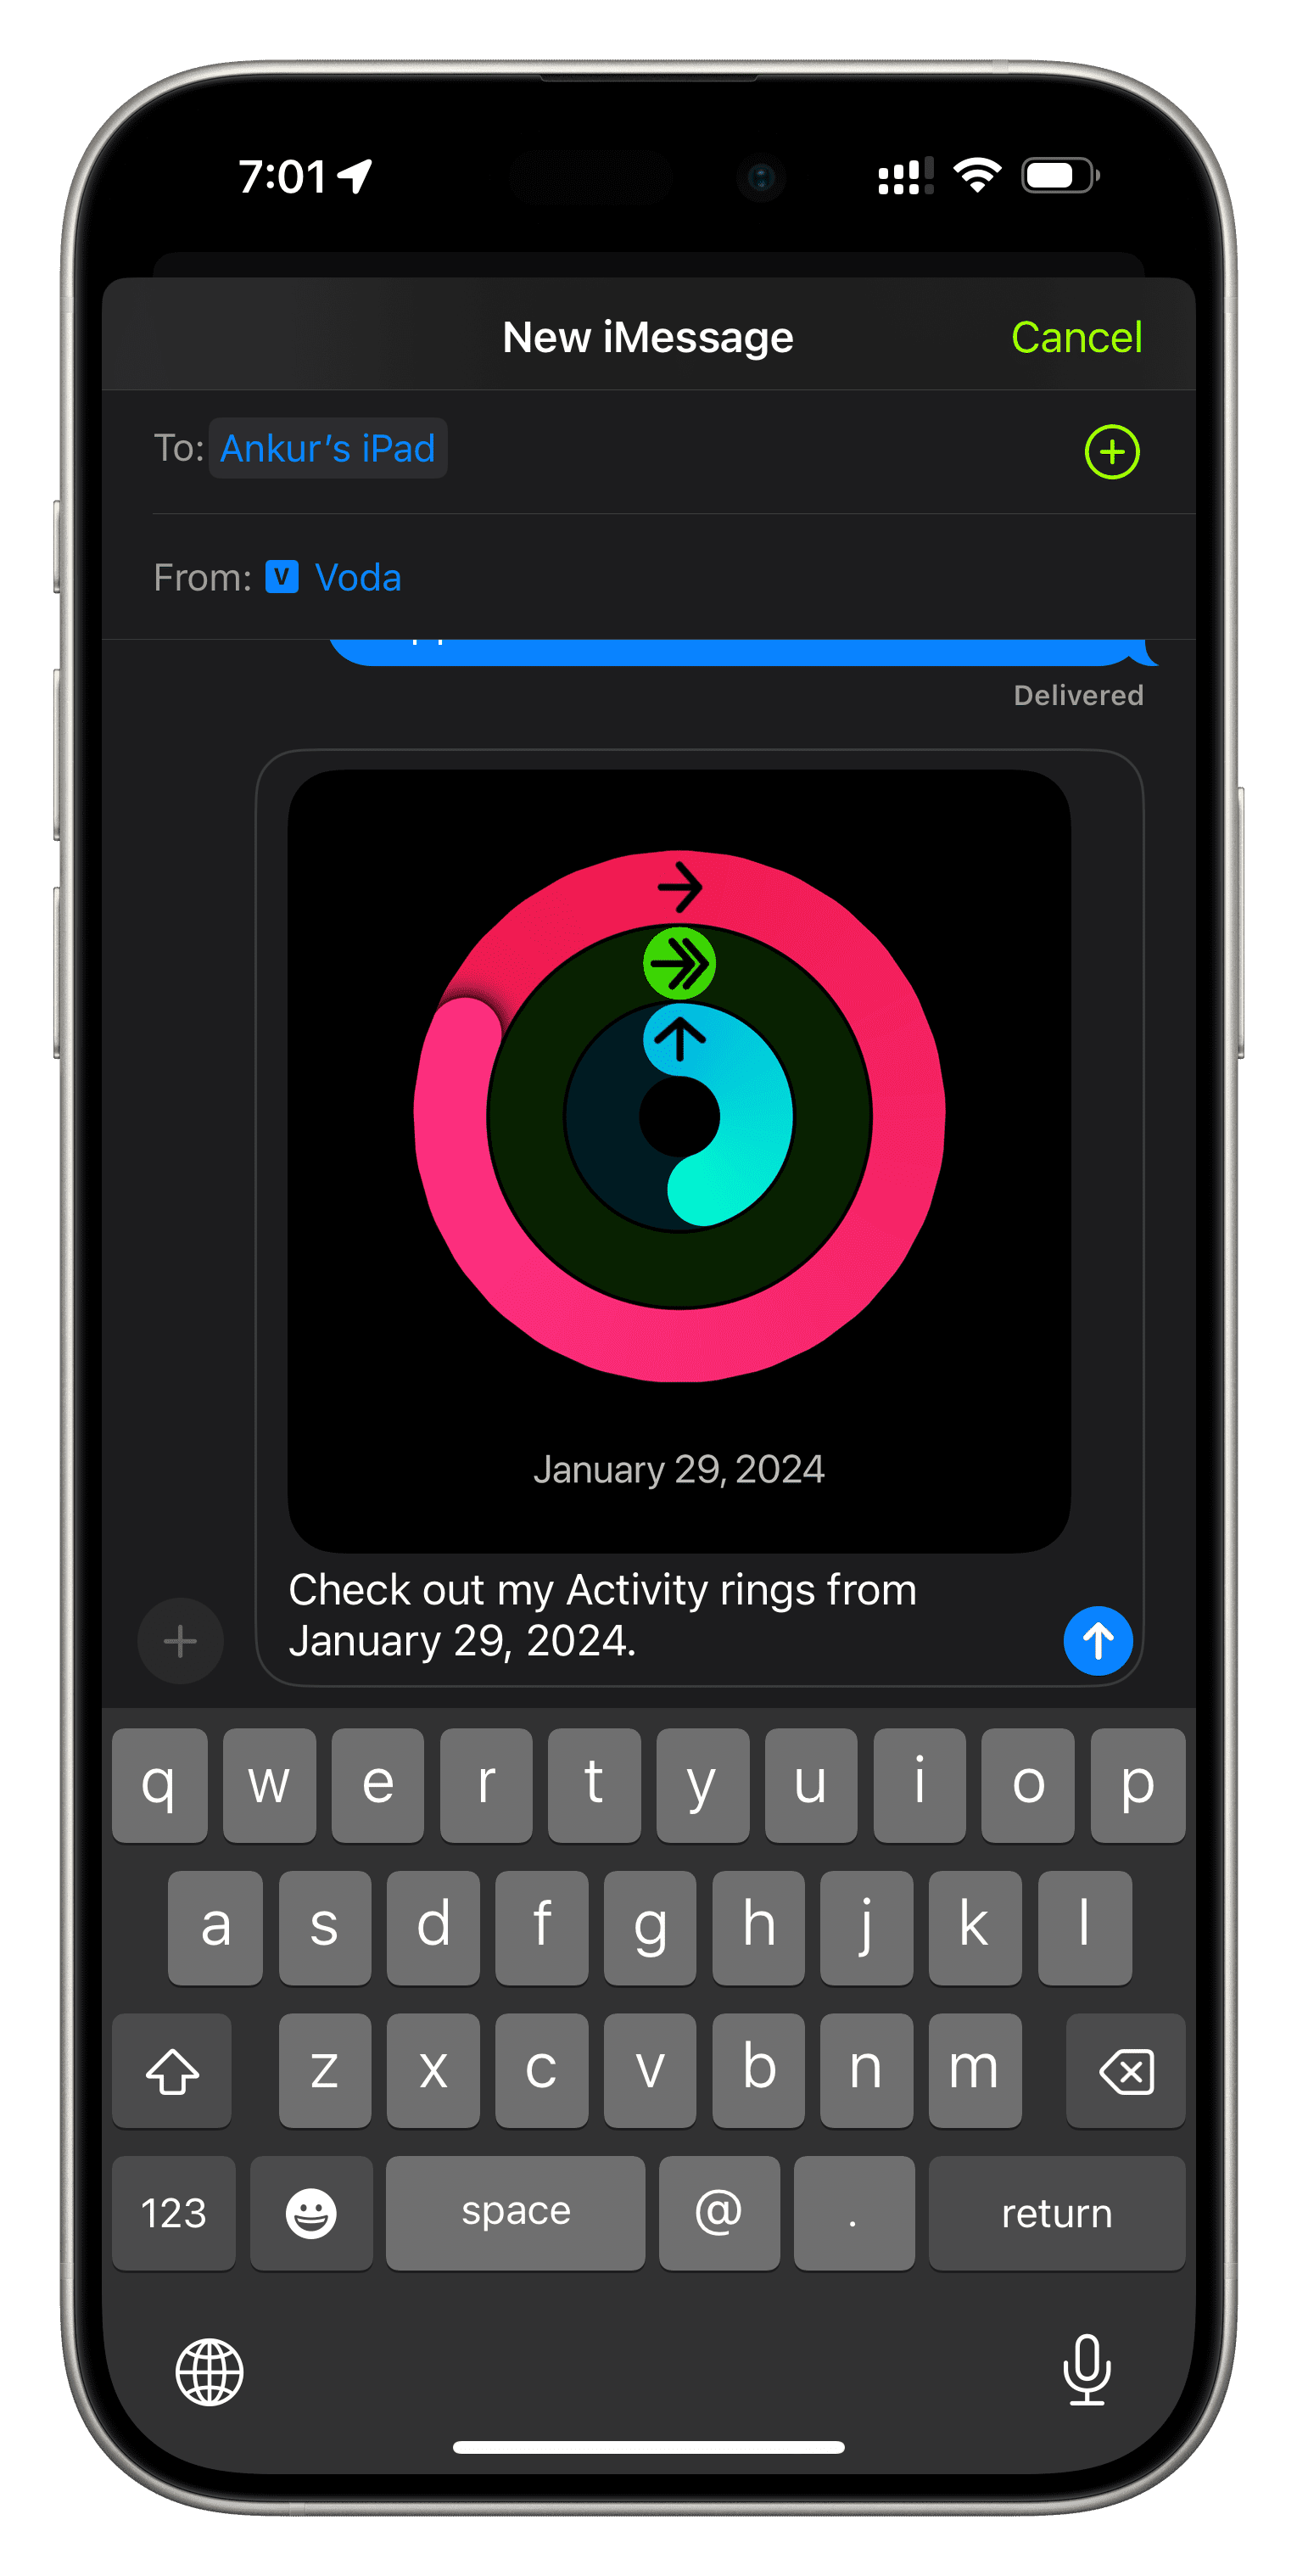 Sharing Activity Rings image using iPhone Messages